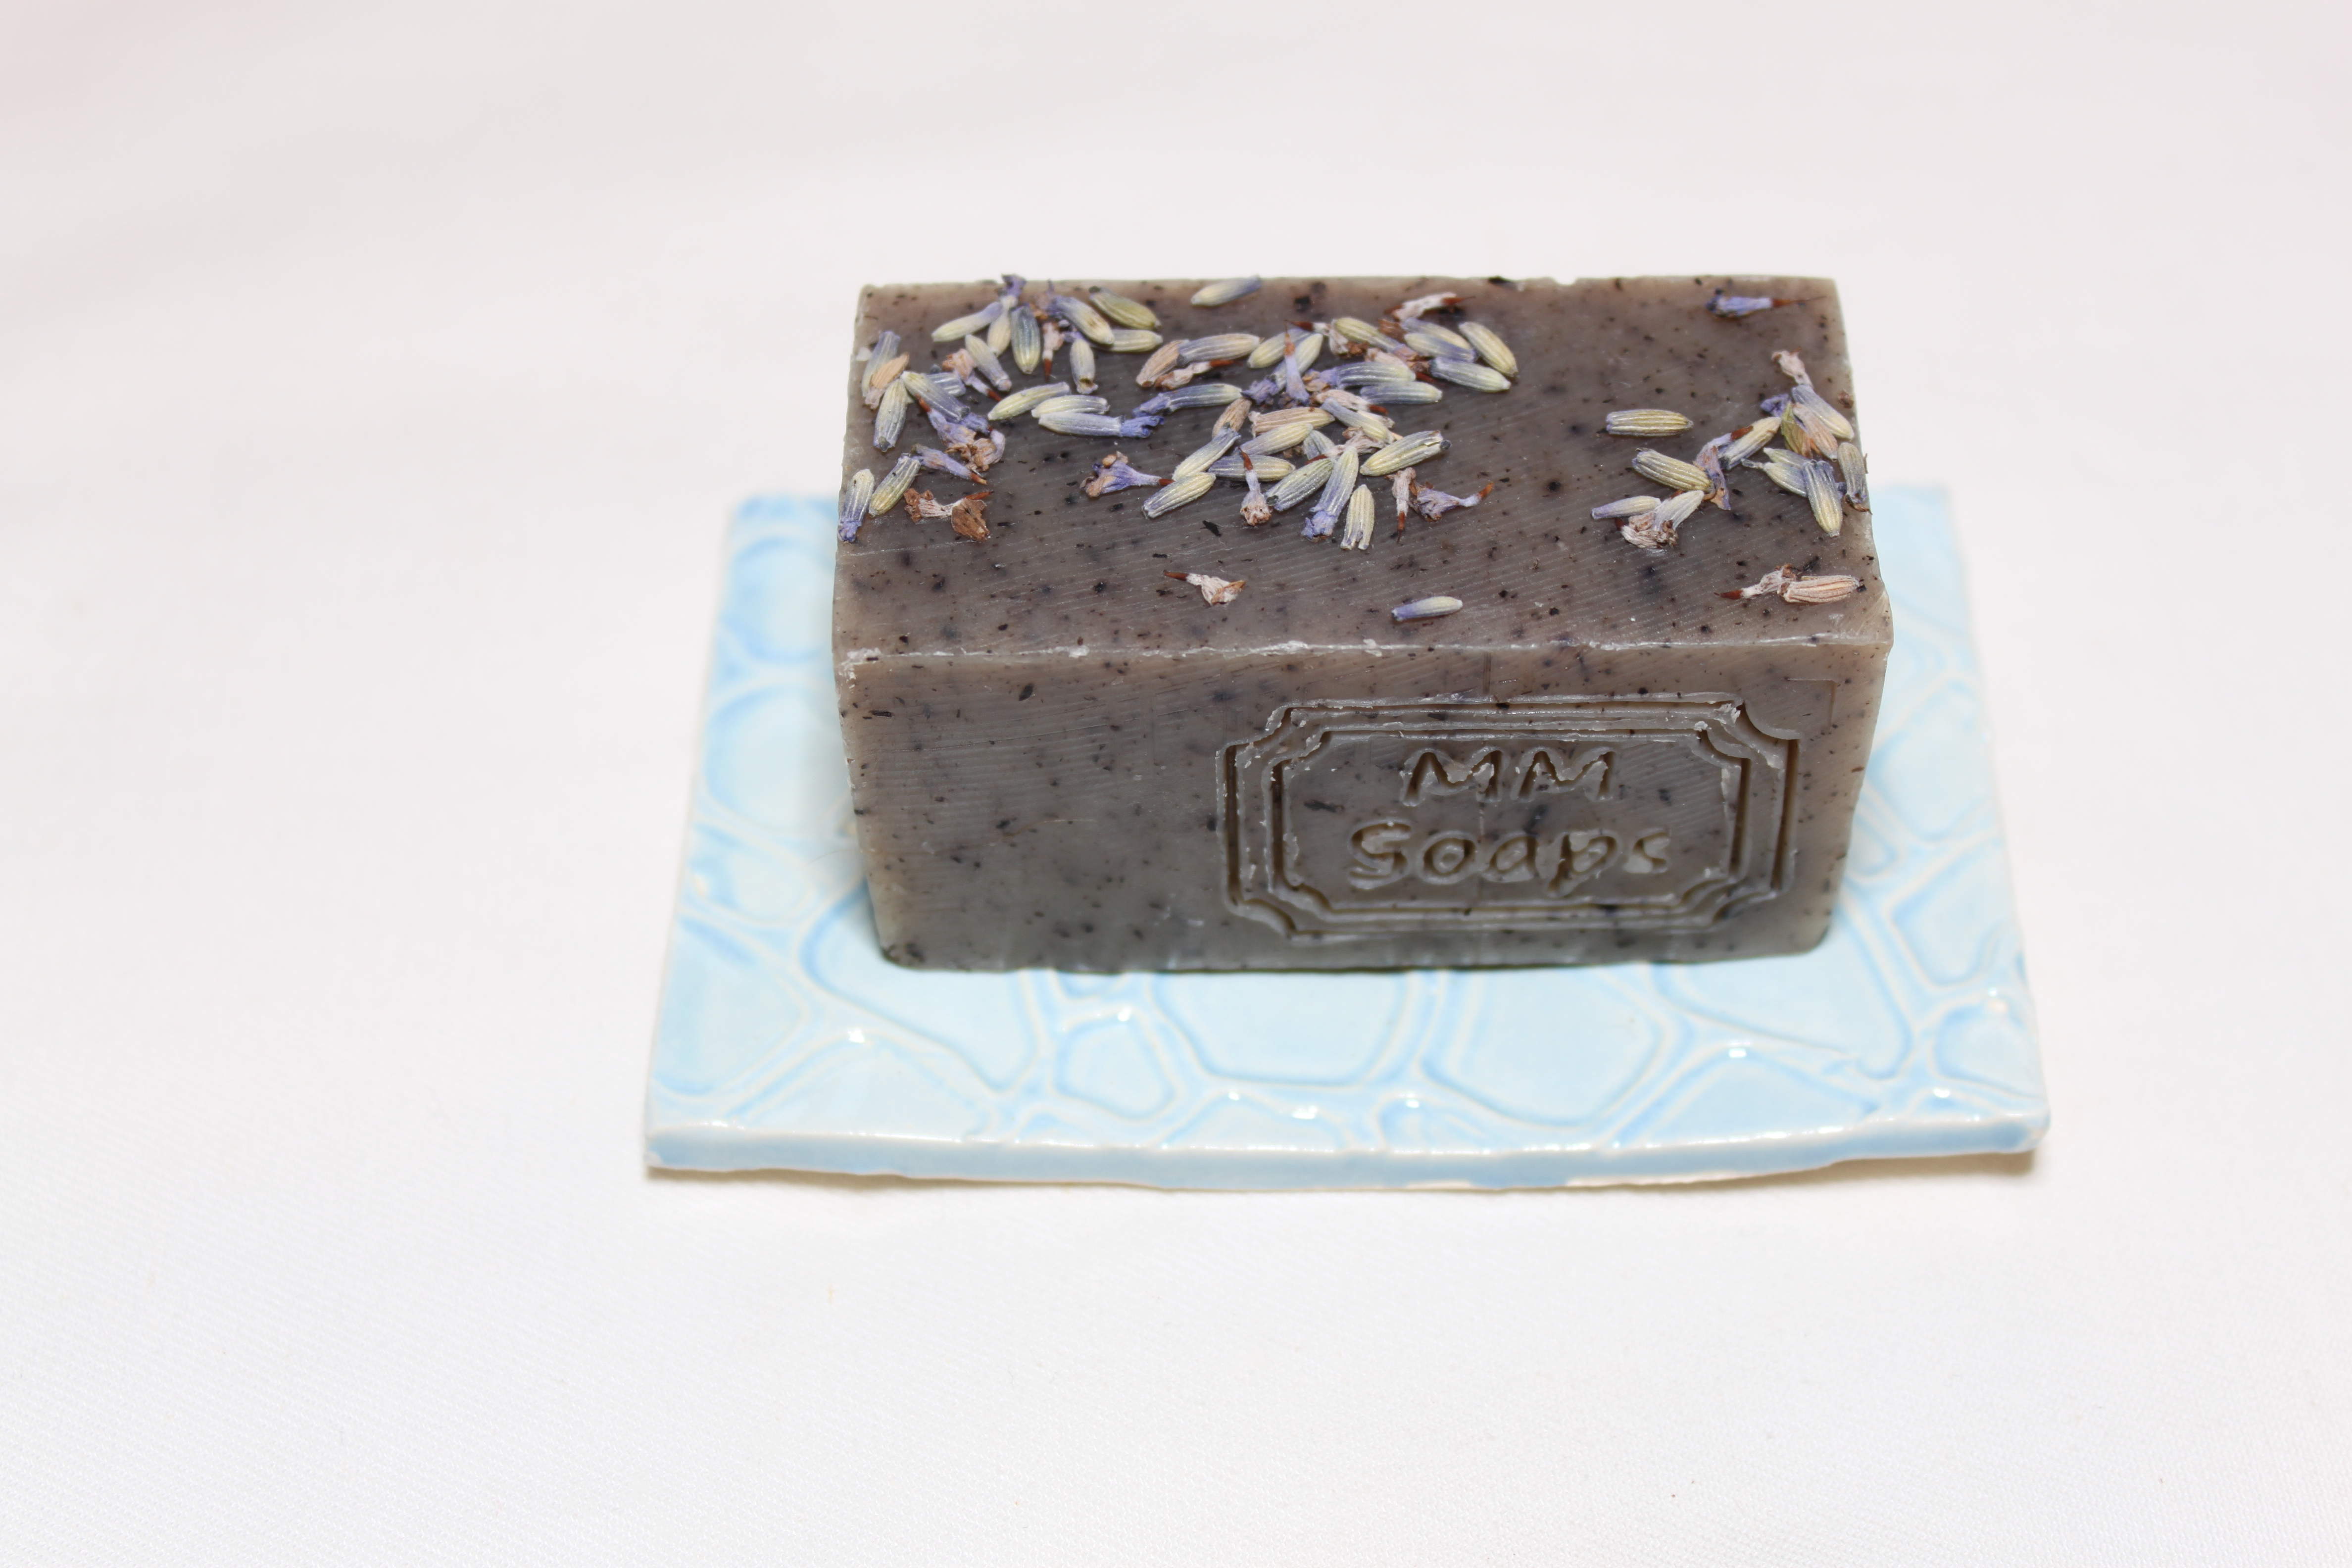 Lavender, Peppermint, and Alkanet Root Soap.